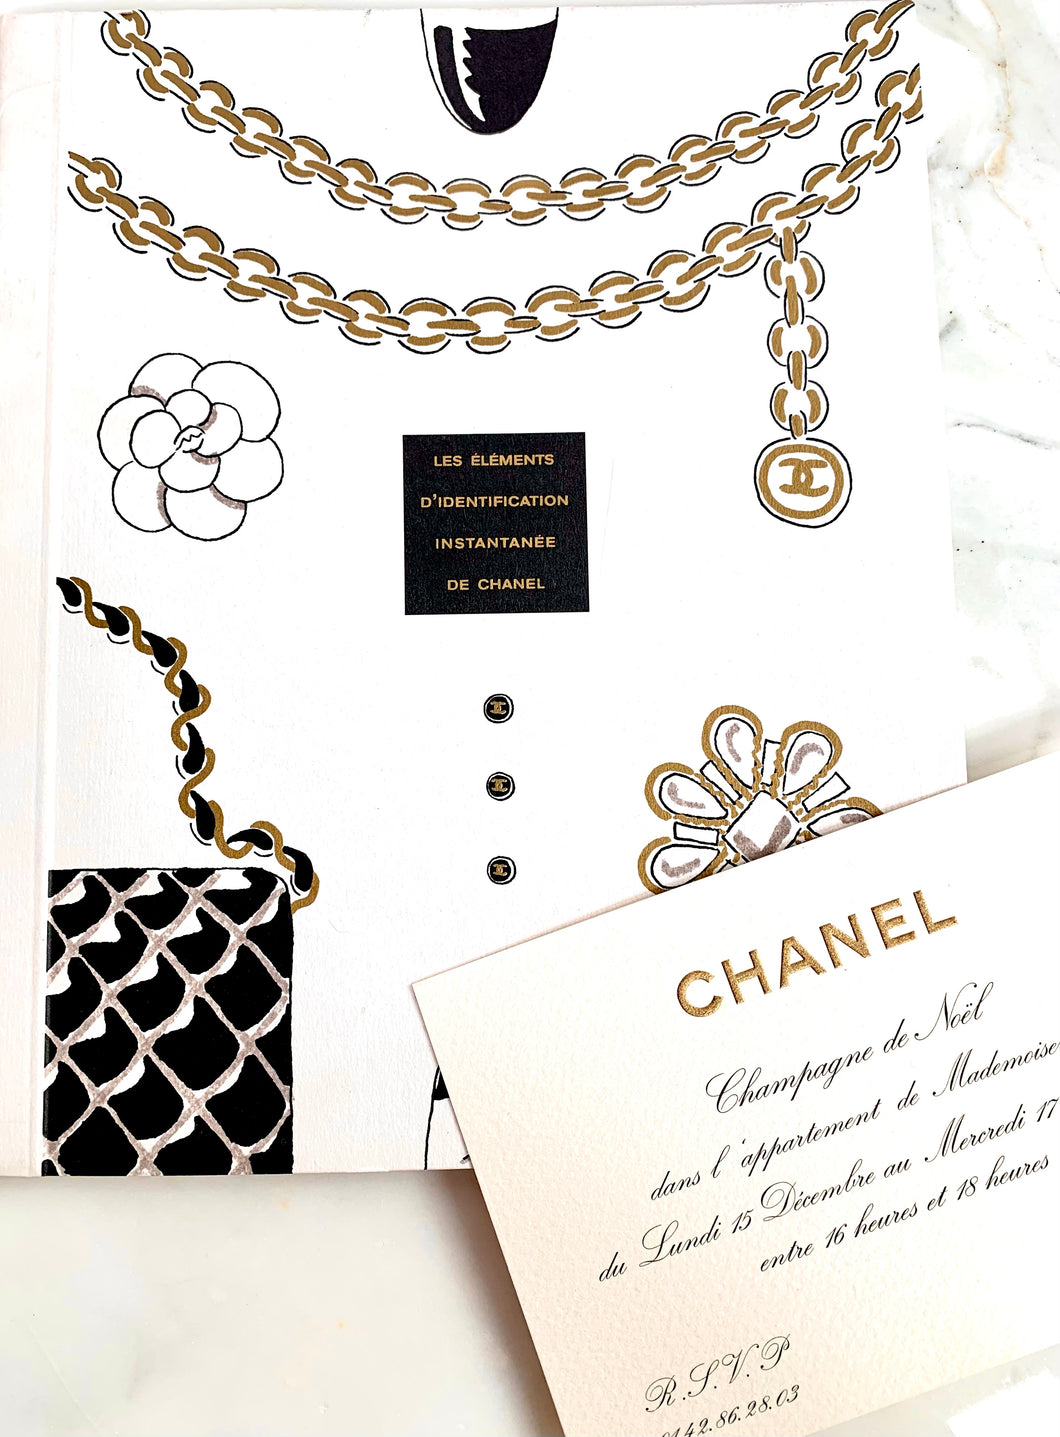 CHANEL 1997 VIP GIFT BOOK WITH STICKERS AND INVITE CHAMPAGNE RECEPTION IN COCO'S APARTMENT